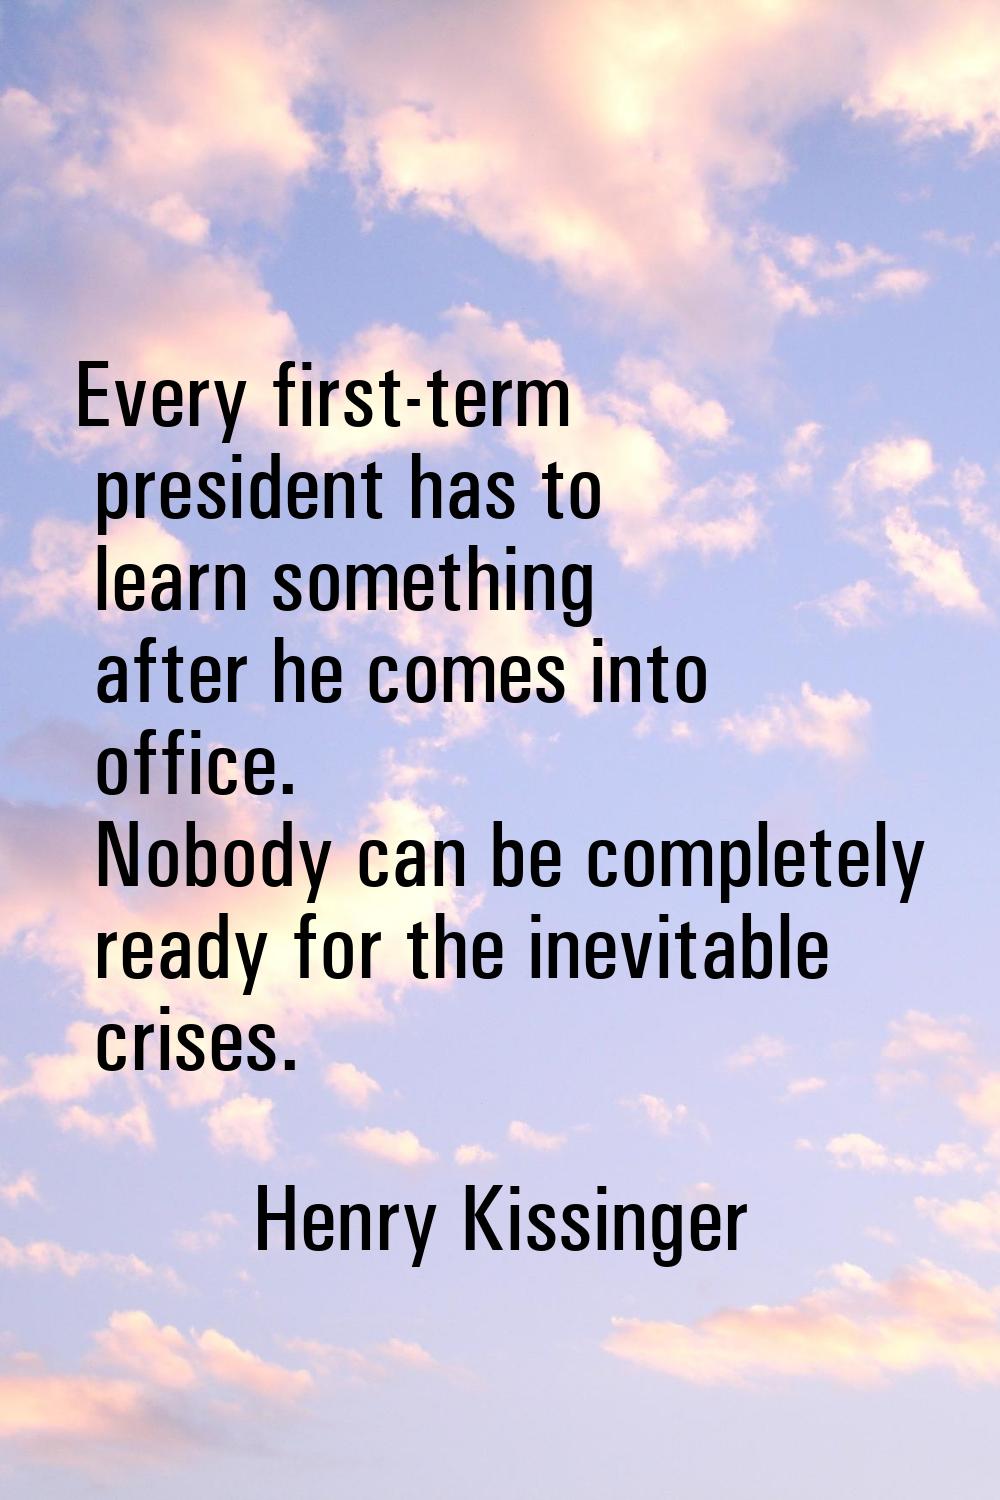 Every first-term president has to learn something after he comes into office. Nobody can be complet